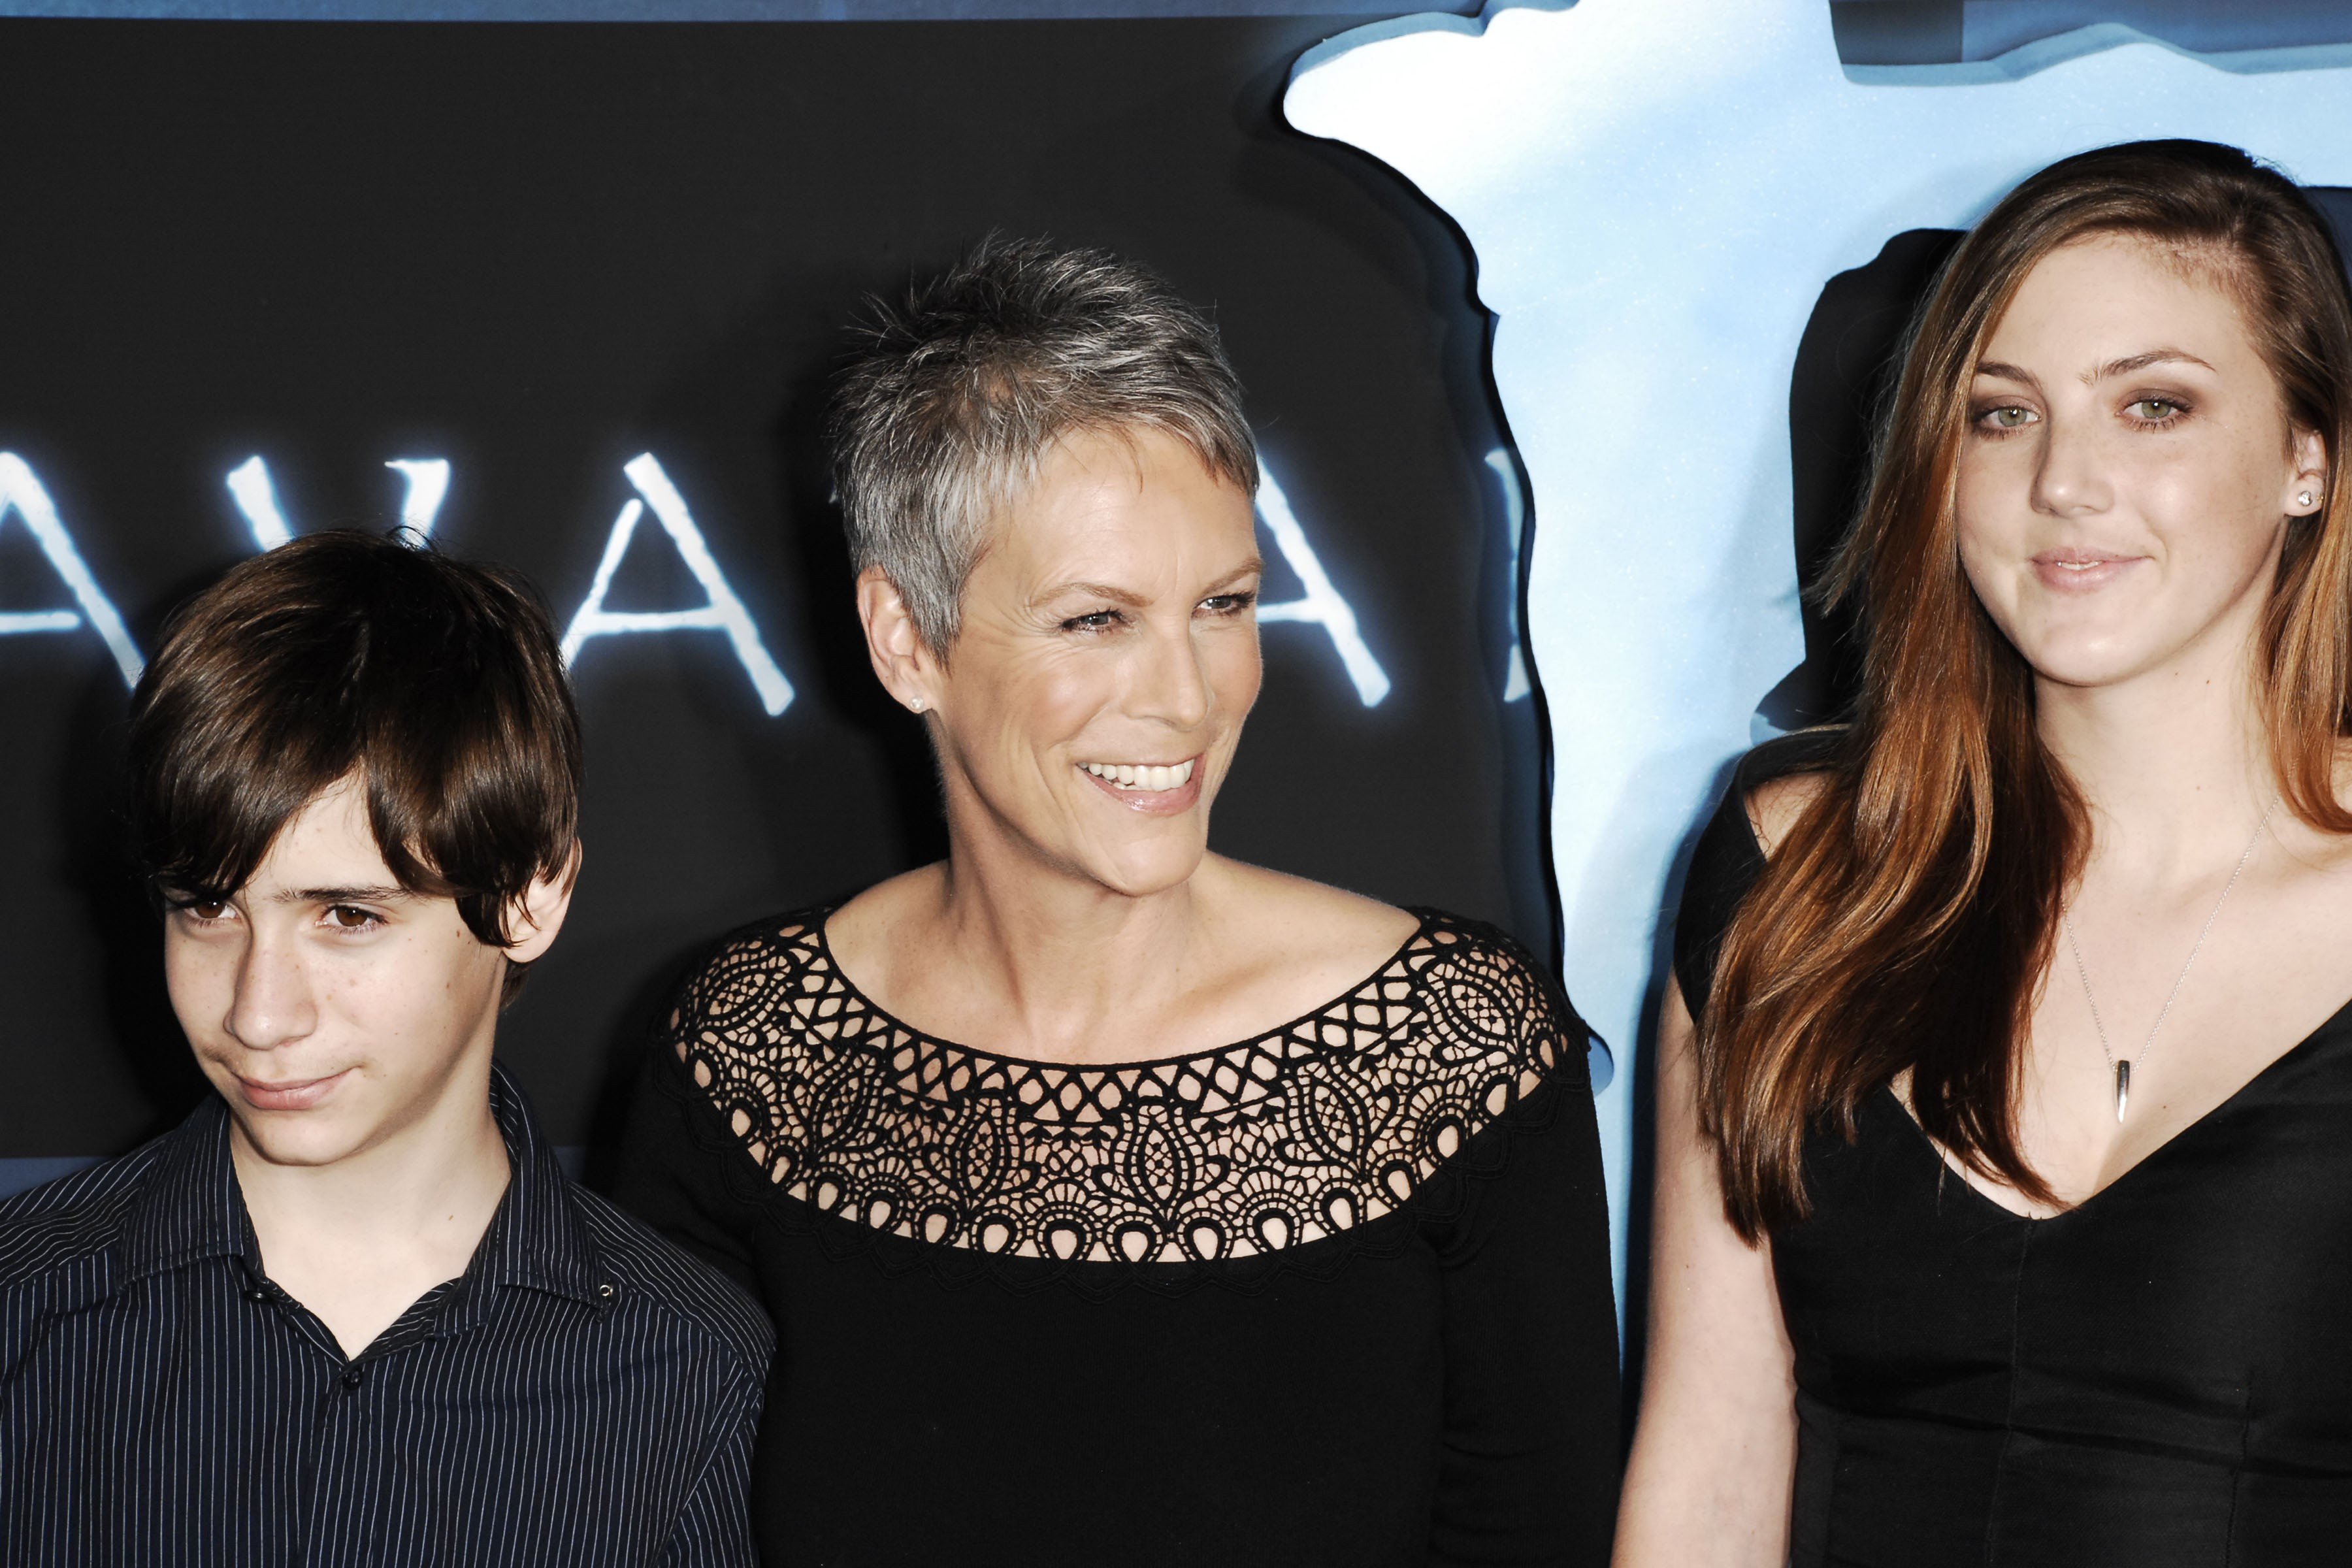 Thomas Guest, Jamie Lee Curtis, and Annie Guest at the Los Angeles premiere of 